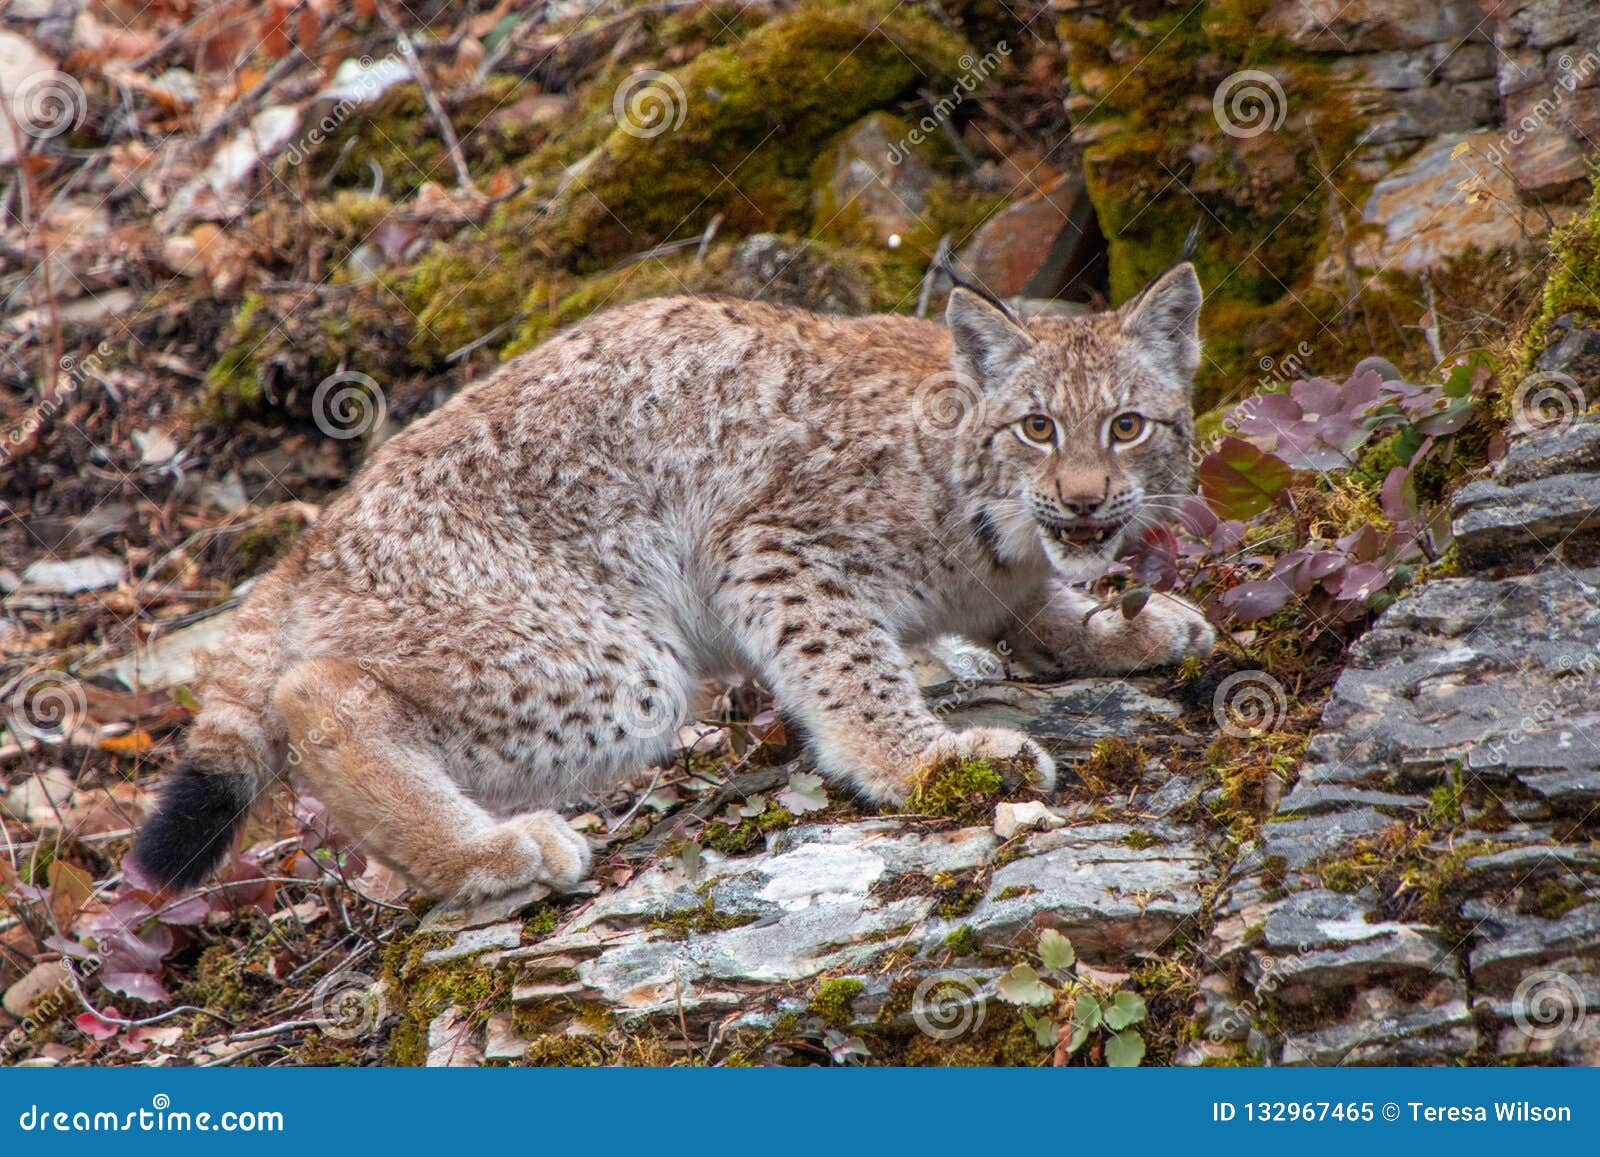 Siberian Lynx Kitten in the Fall Stock Image - Image of hunter, young ...